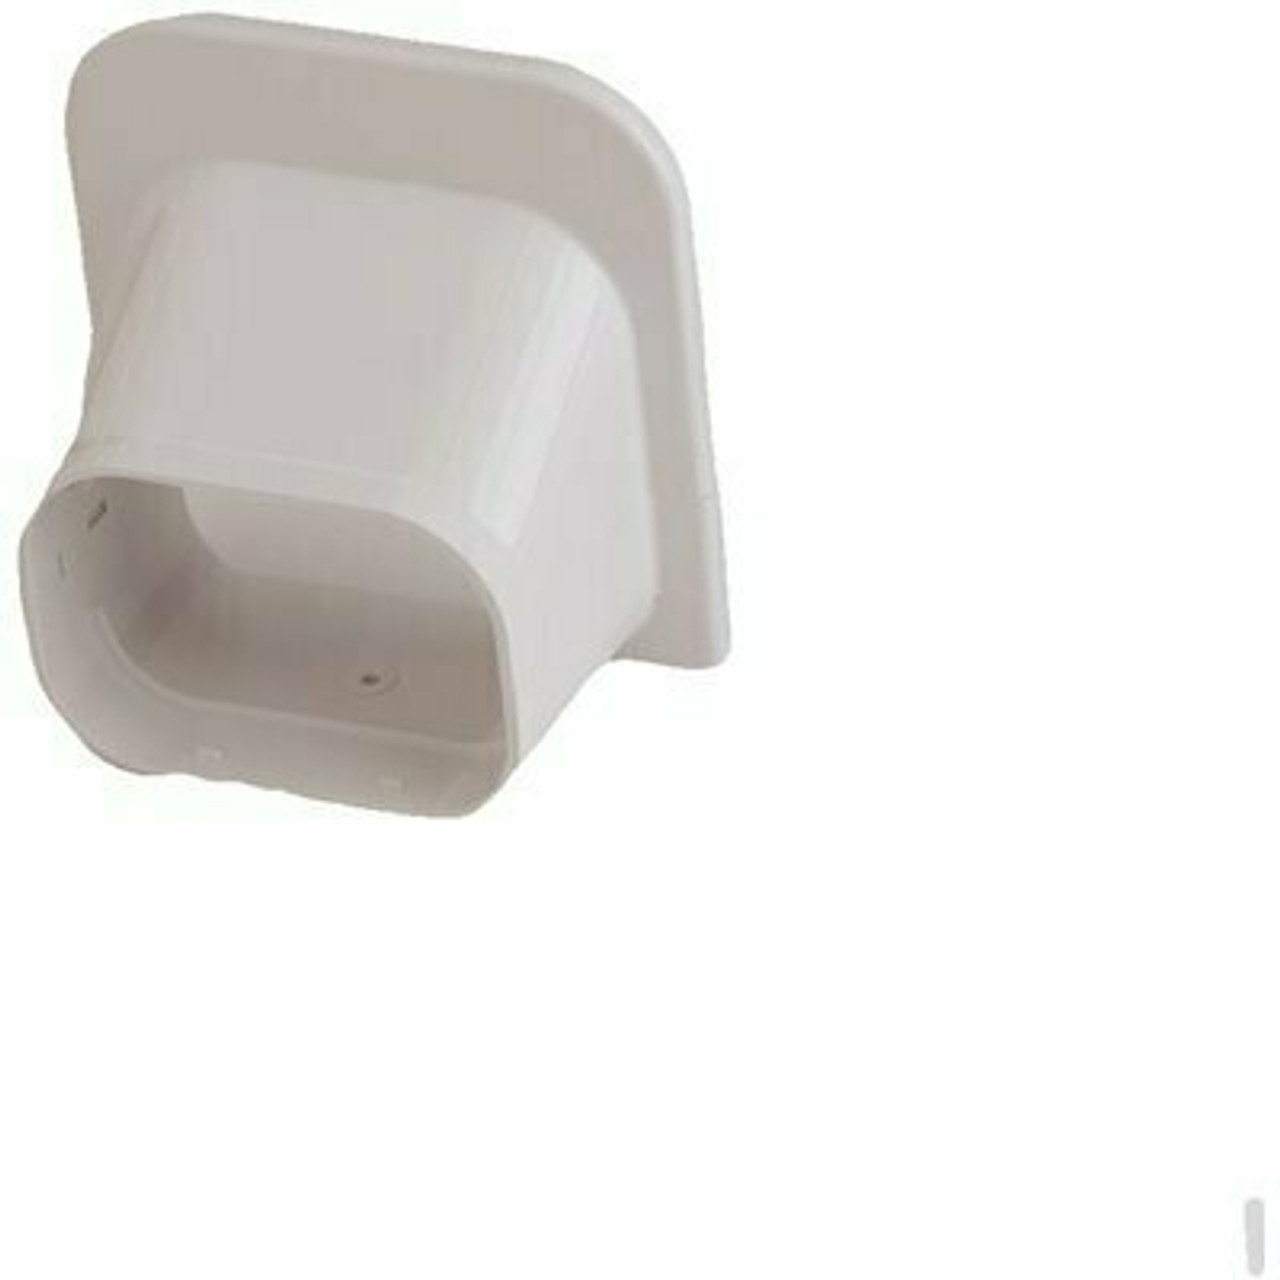 Rectorseal Slimduct Sofit Inlet In White